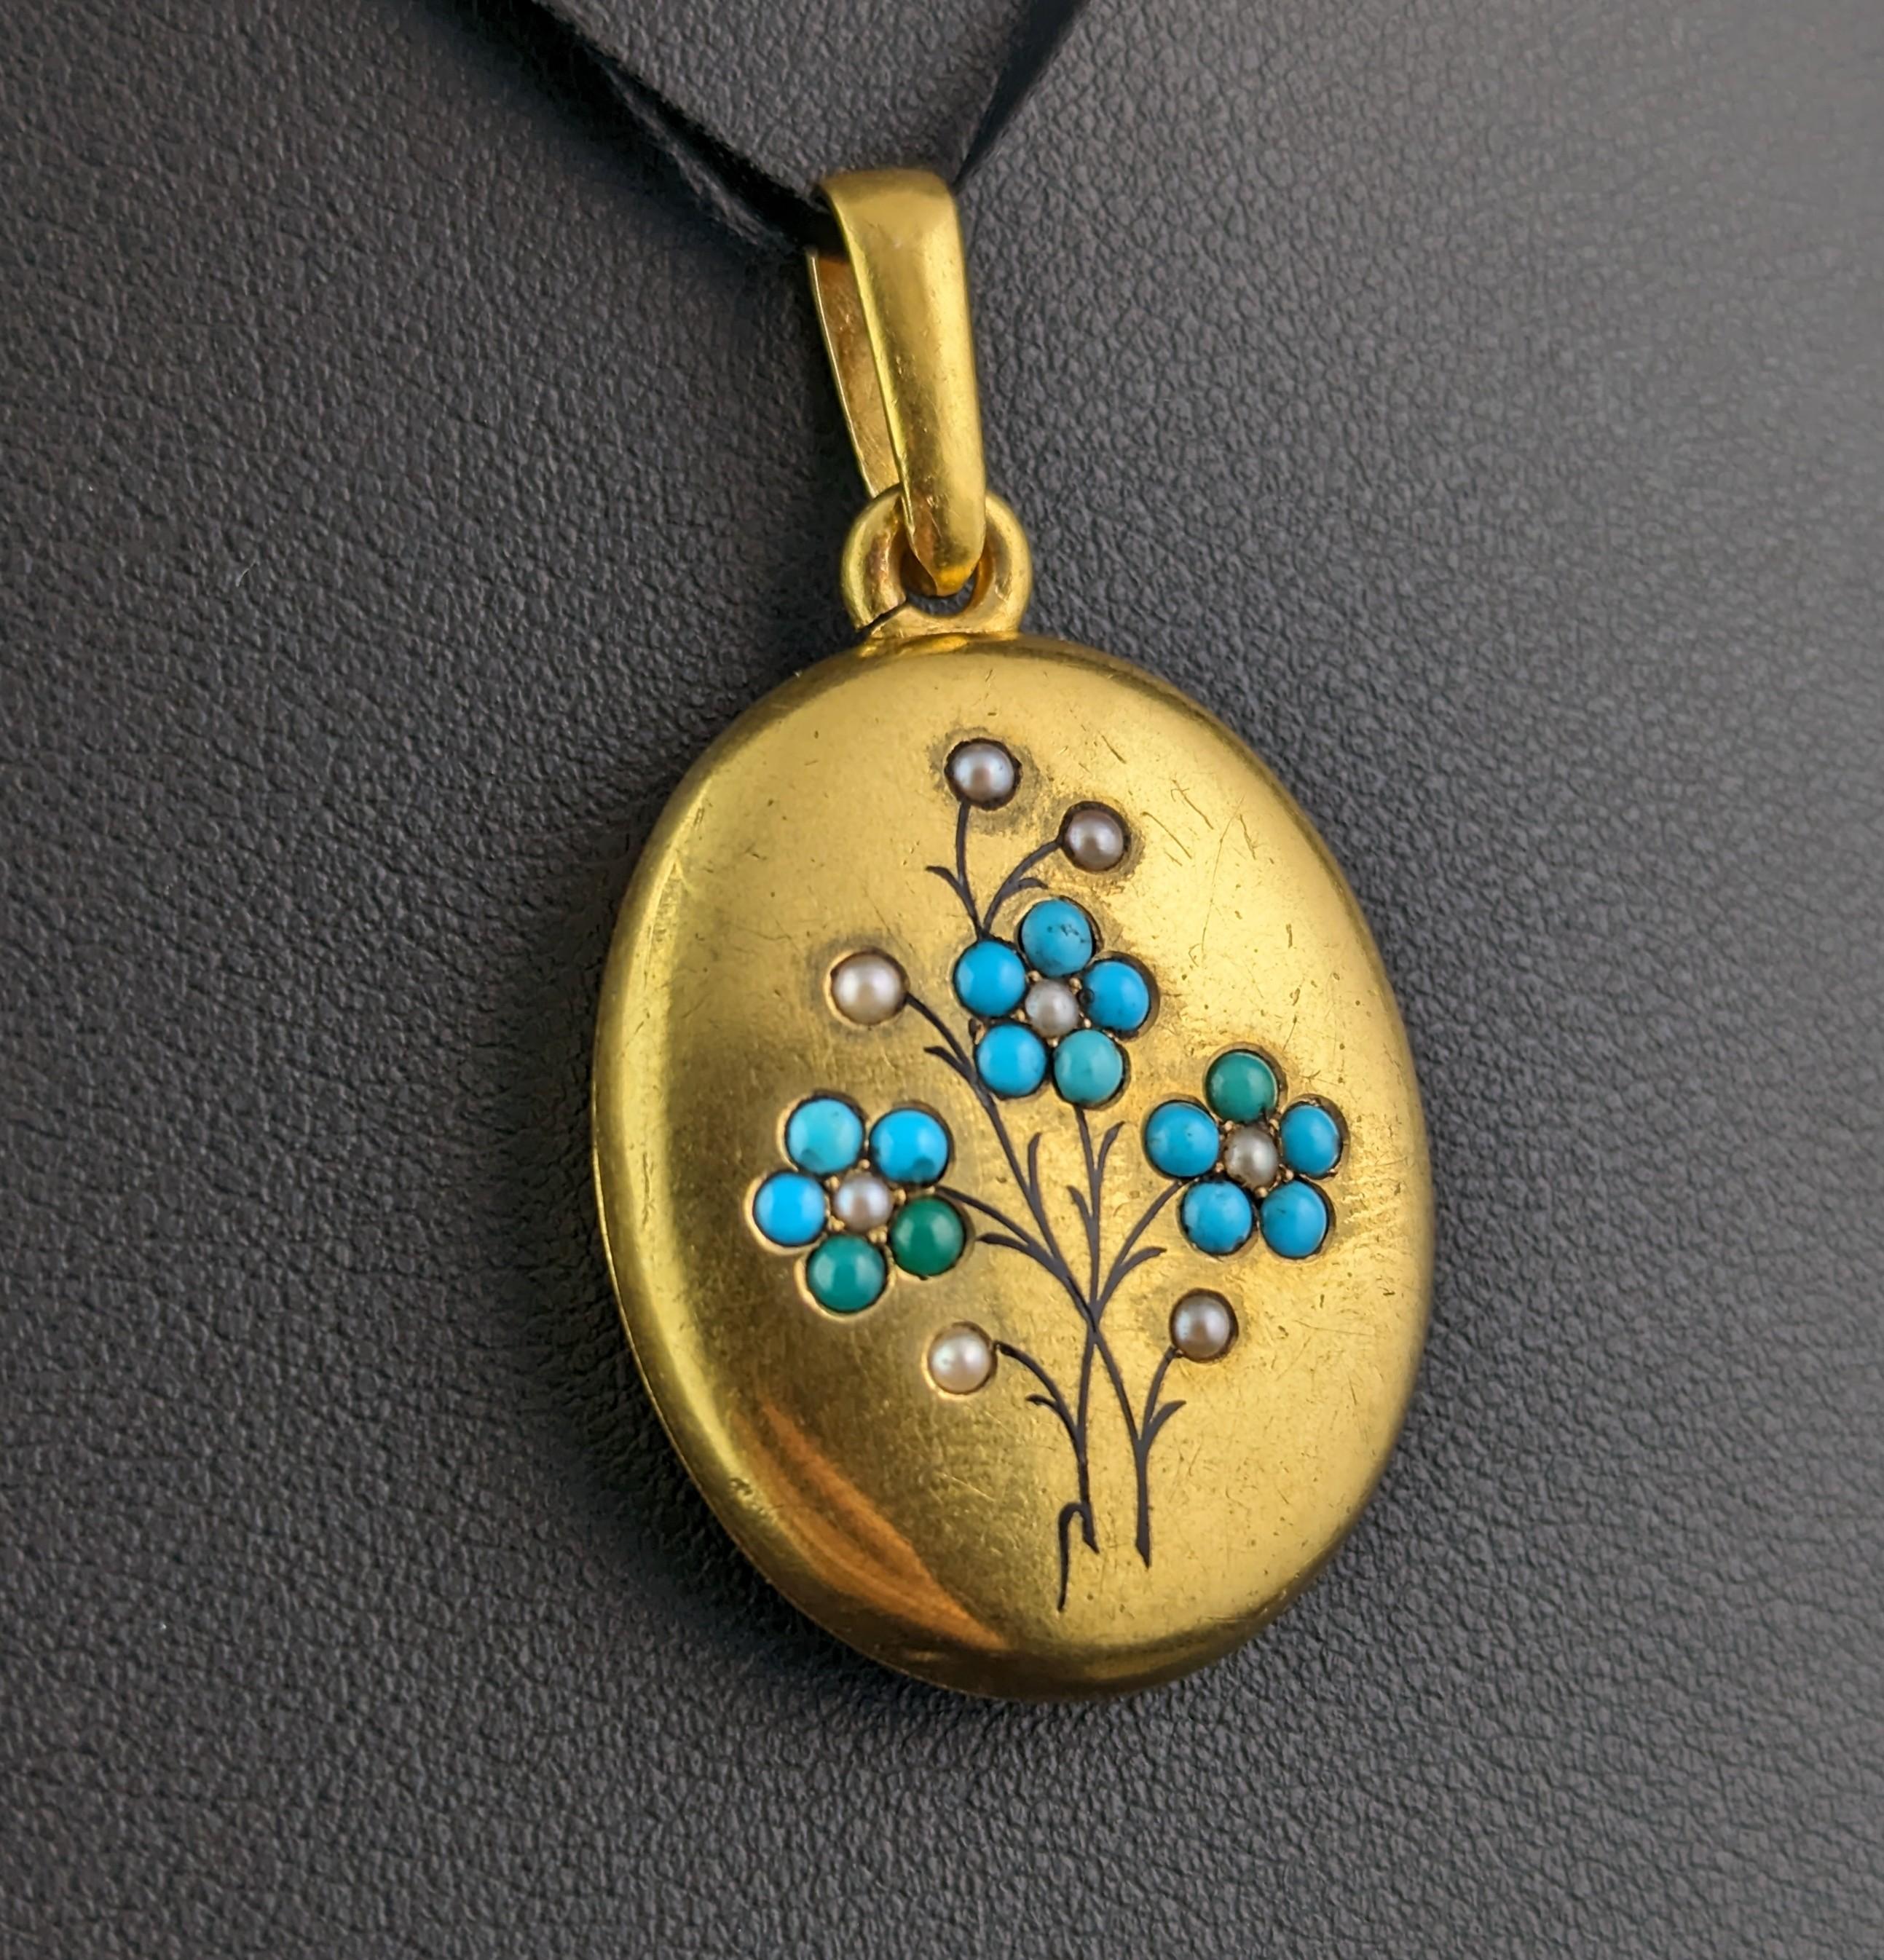 This Antique gold locket is an absolute favourite here at StolenAttic, beautiful and unusual it is a wonderful find.

The locket is crafted in rich buttery 15ct gold with a bloomed gilt finish.

The front is finely decorated in delicate black enamel